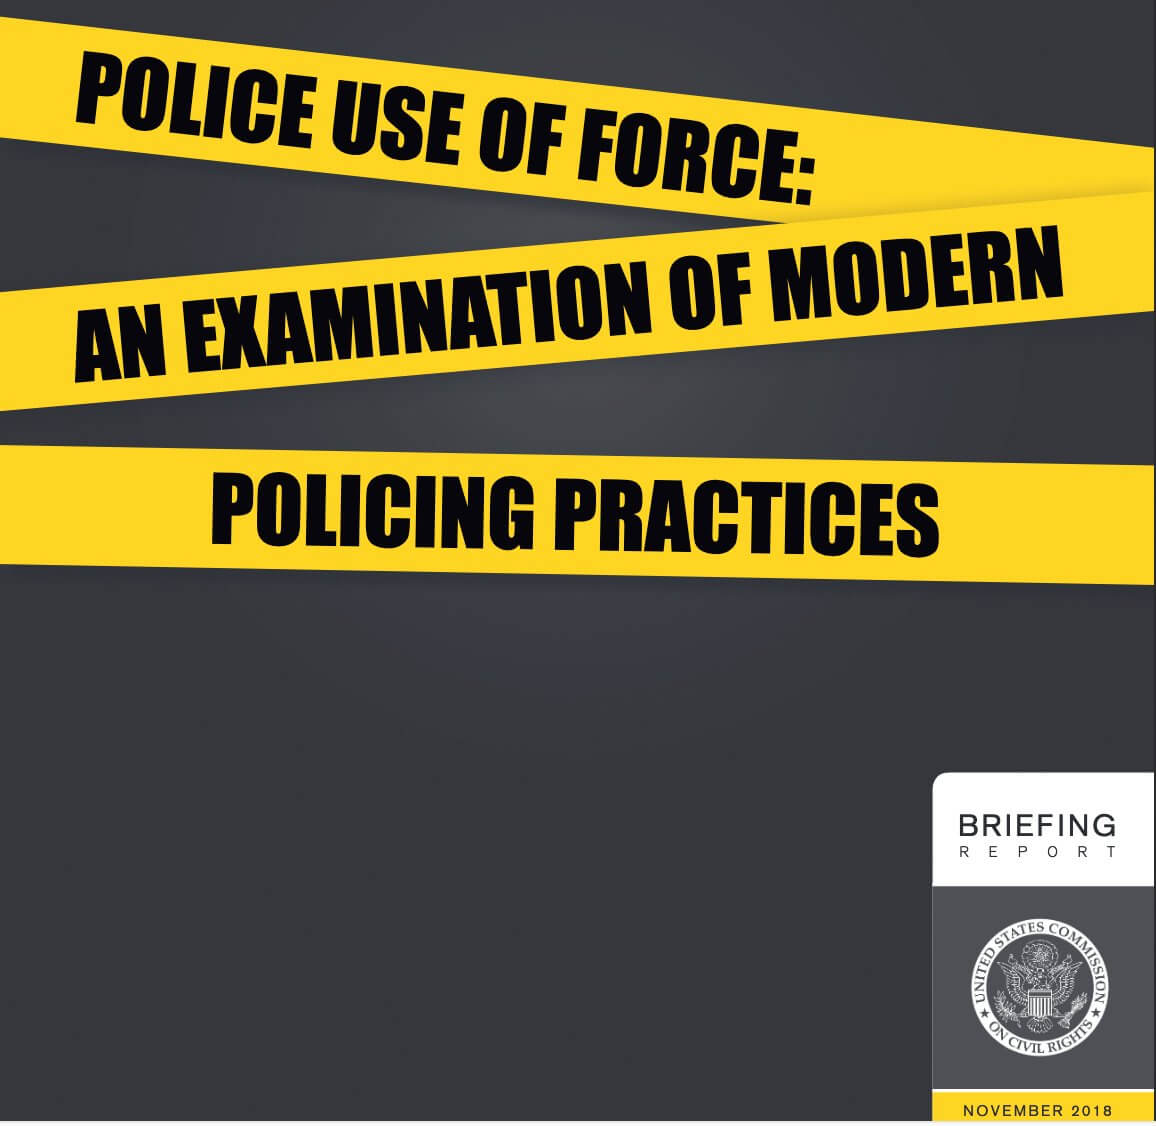 Police Use of Force: An Examination of Modern Policing Practices